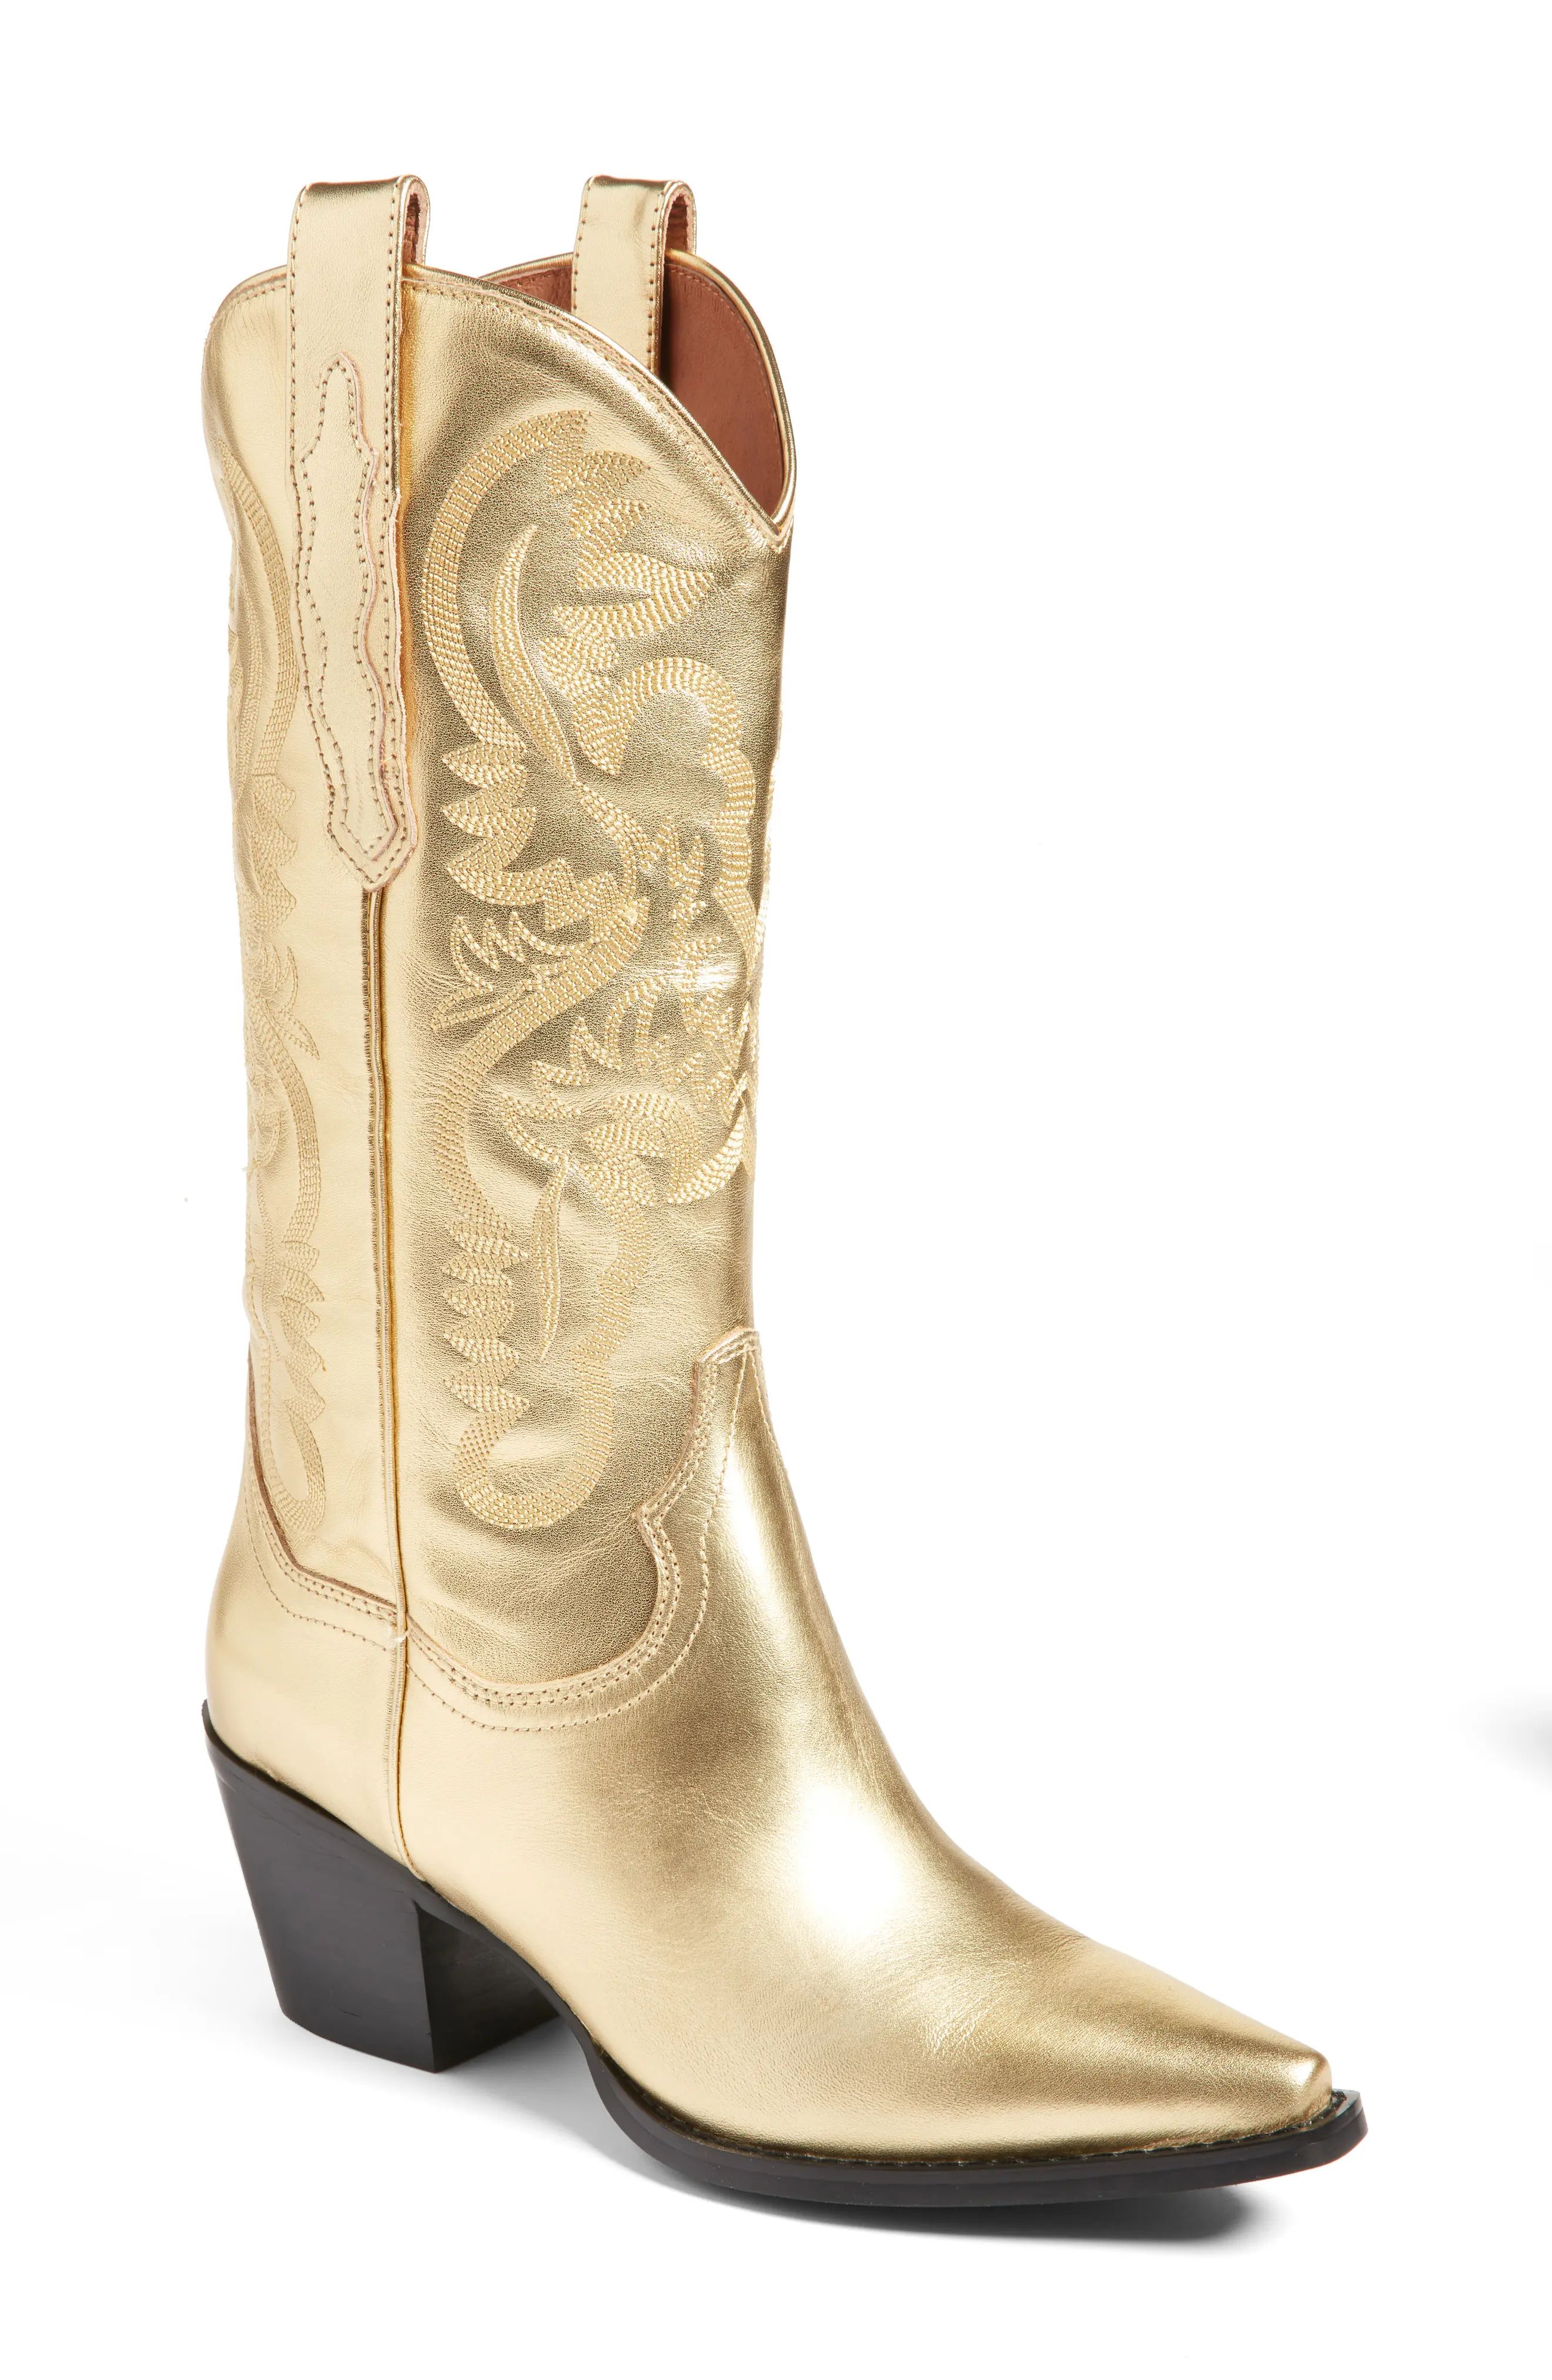 Jeffrey Campbell Dagget Western Boot in Gold at Nordstrom, Size 7 | Nordstrom